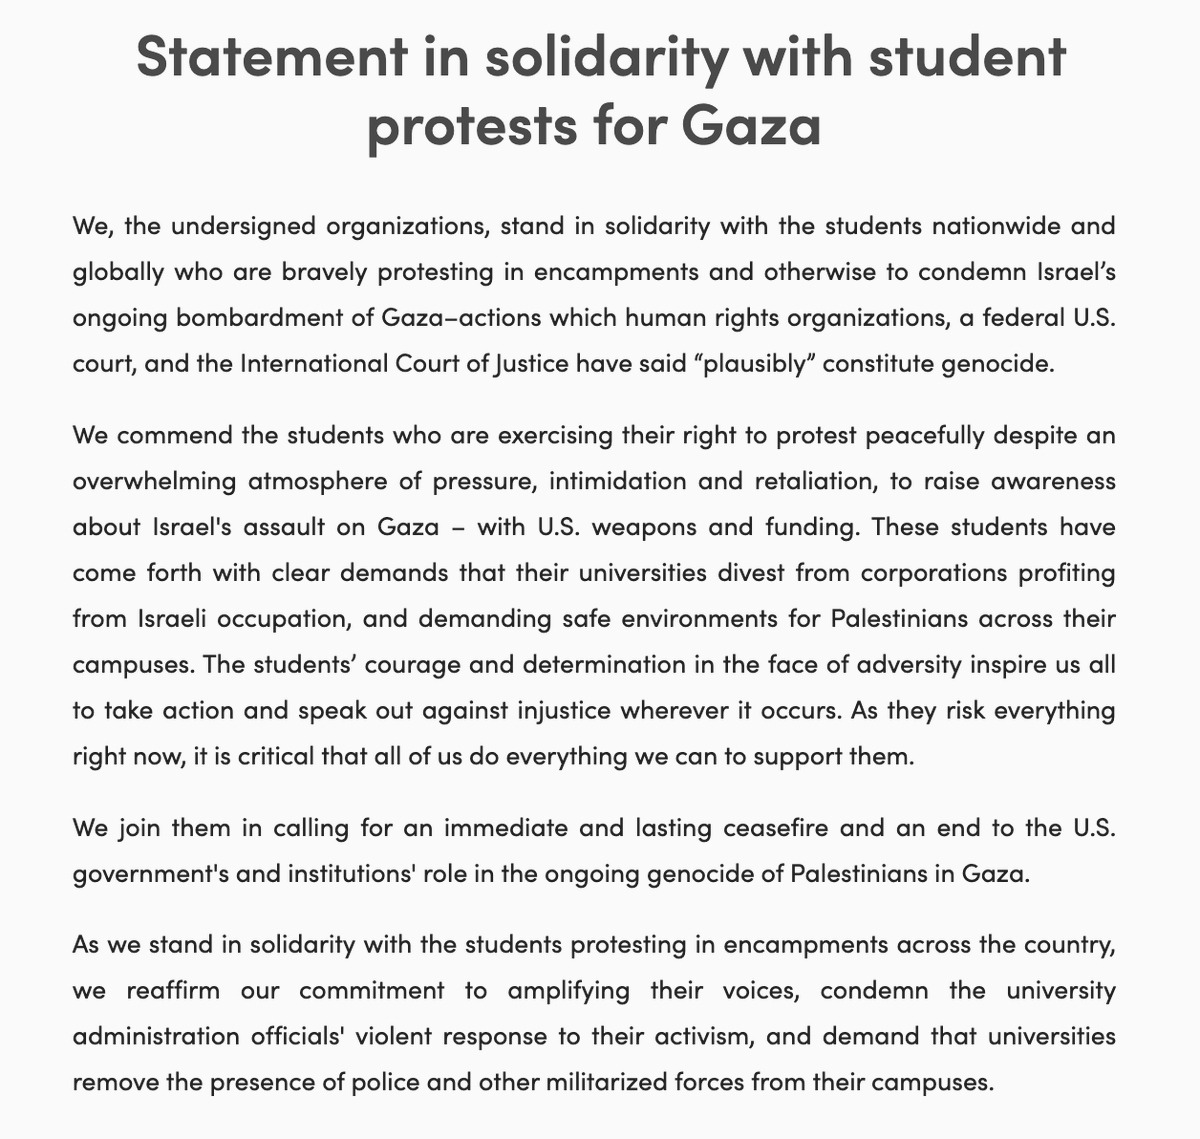 187 religious & human rights groups release statement supporting students protesting war on Gaza amid 'pressure, intimidation and retaliation.' Signers include US Campaign for Palestinian Rights, MPower Change, Jewish Voice for Peace, Veterans for Peace, Hindus for Human Rights.